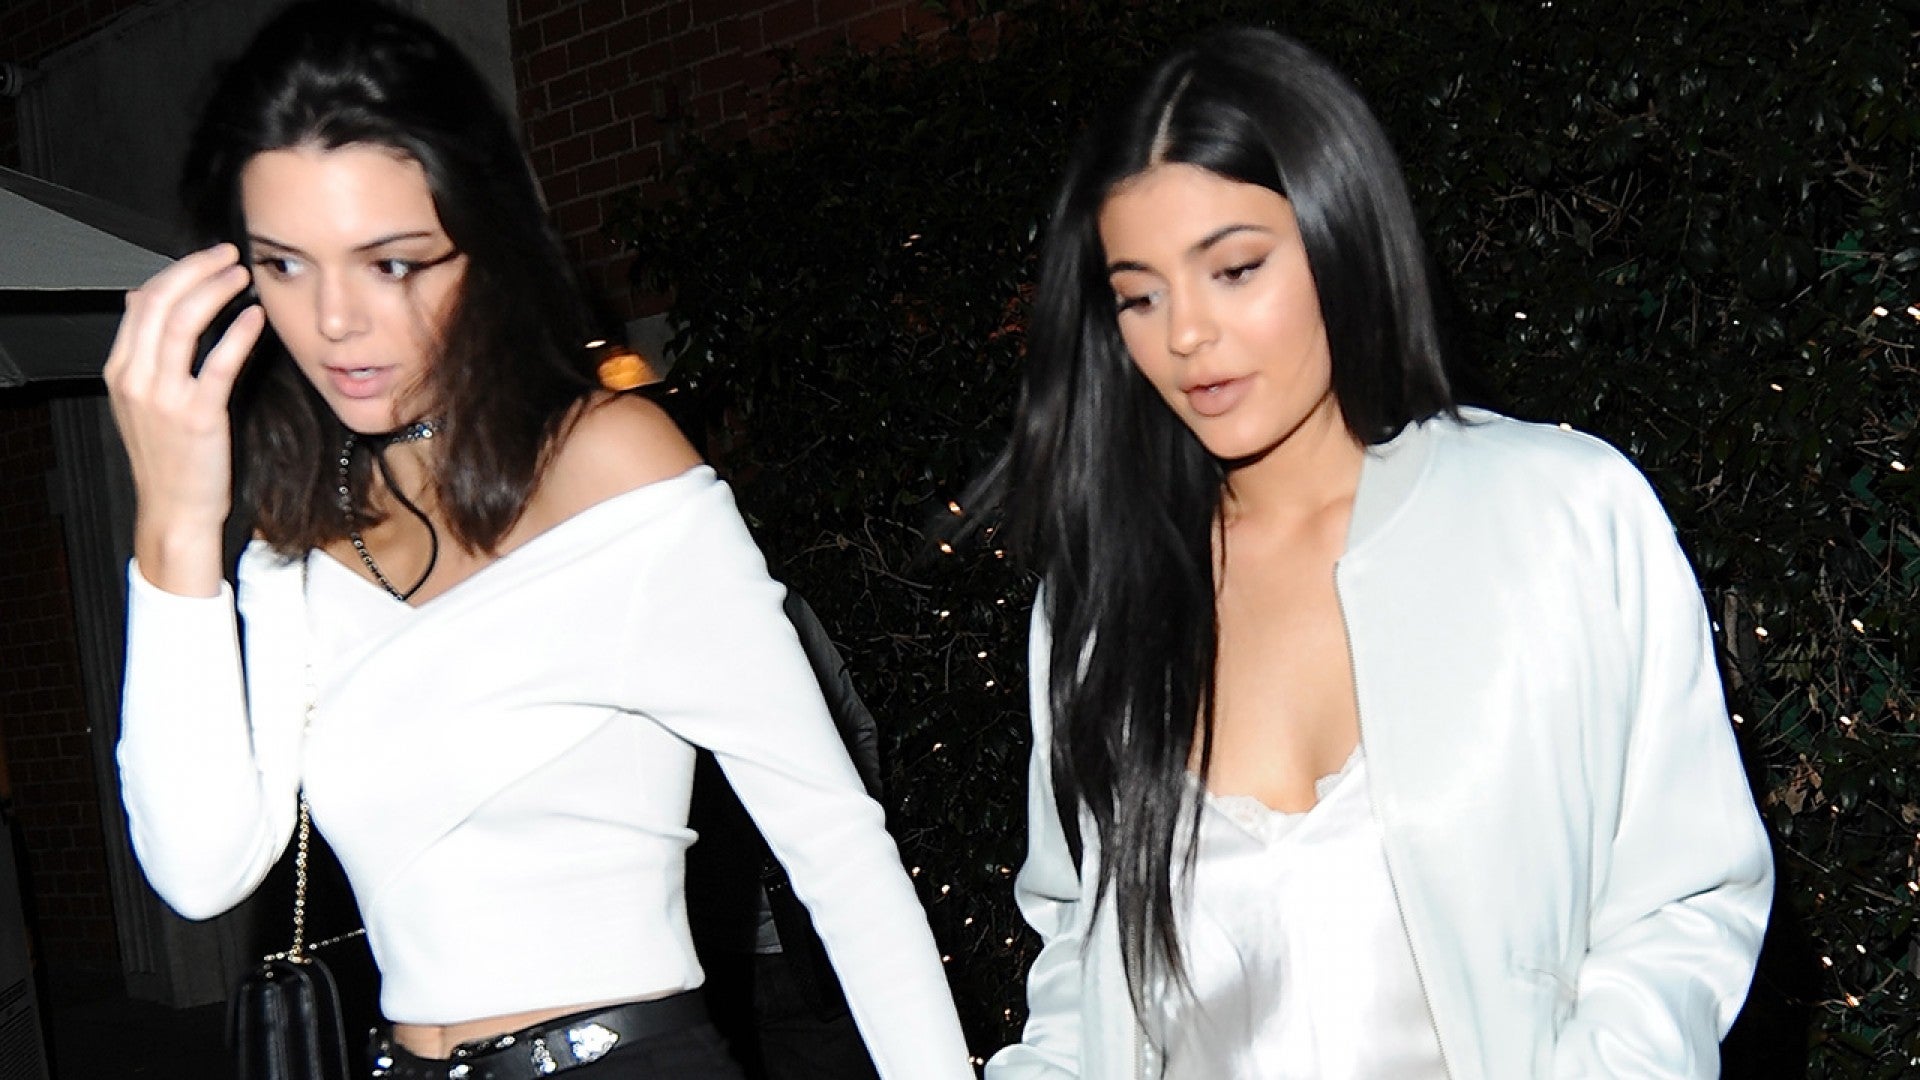 Kylie Jenner Steps Out In Lingerie-Style Dress For Night Out With ...